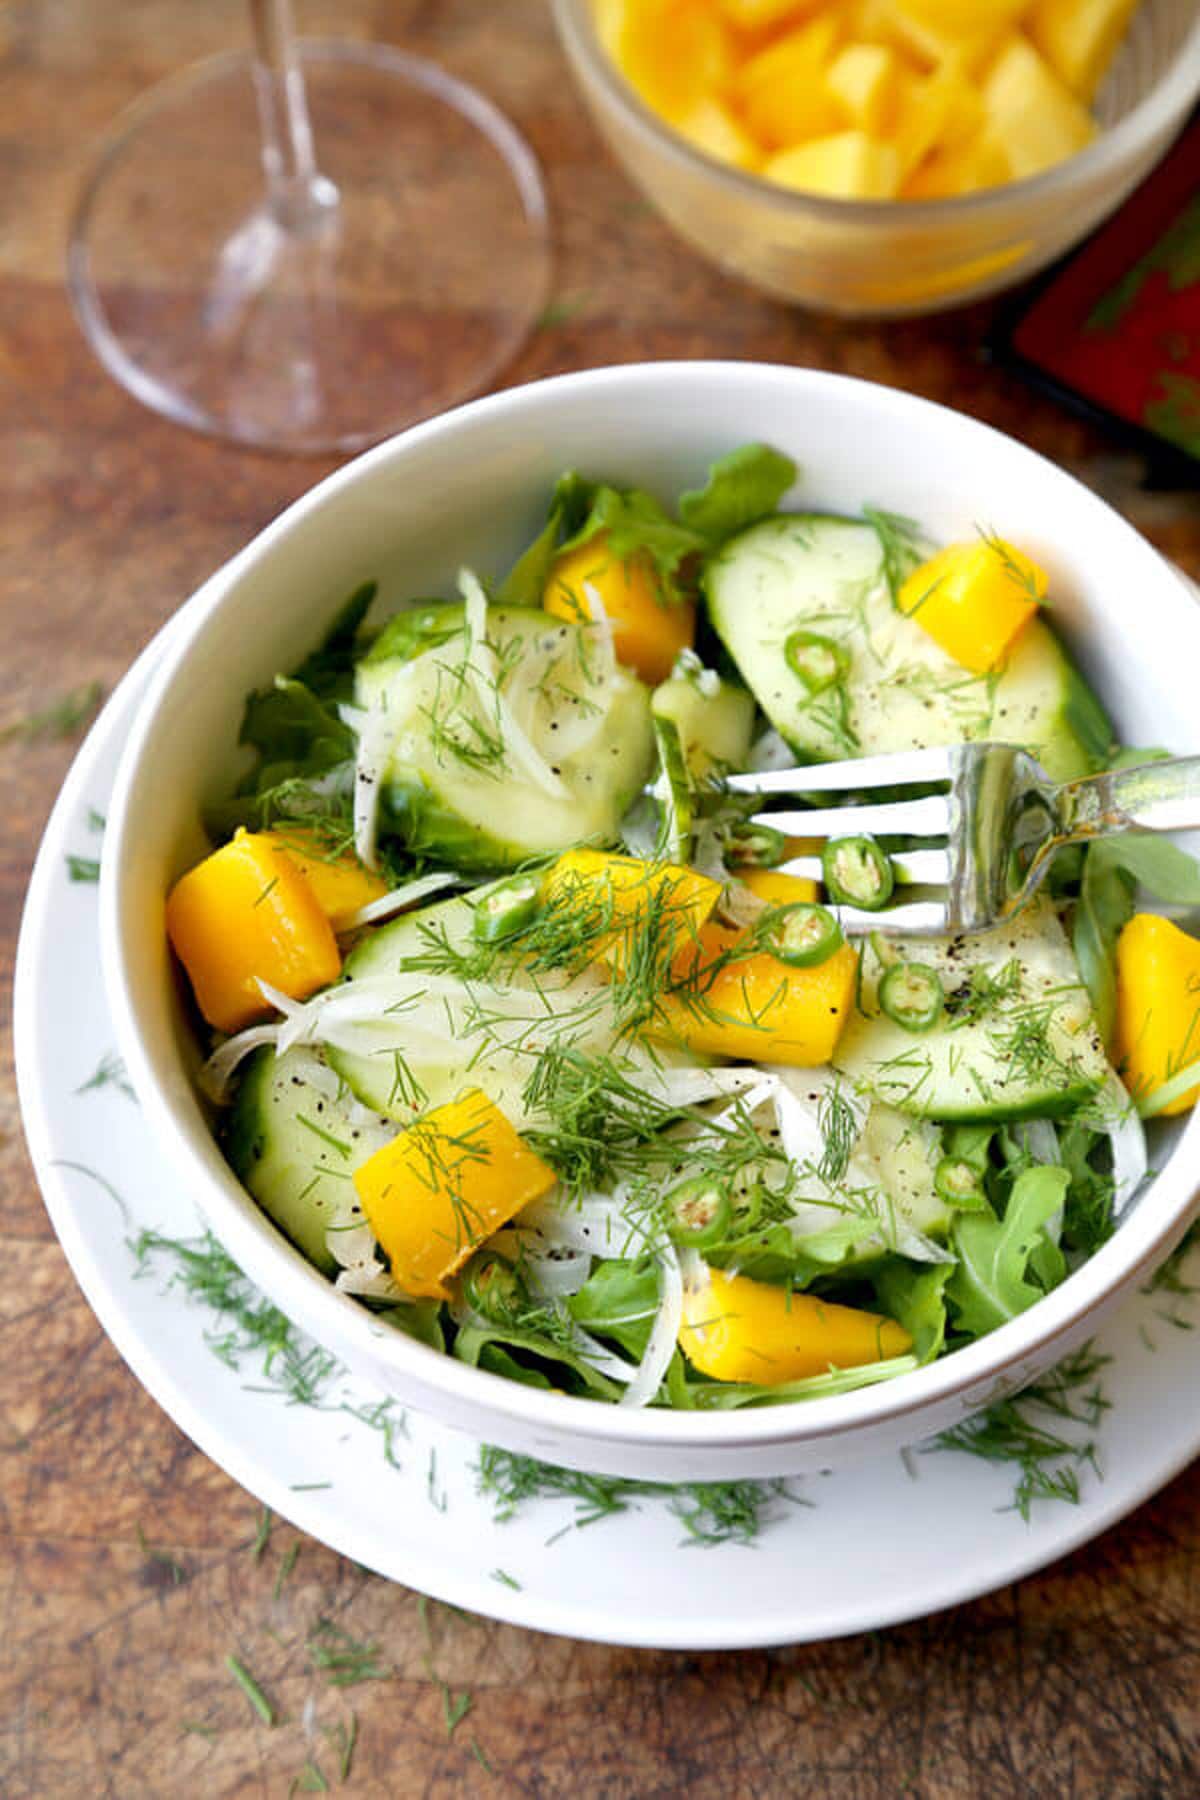 southern style bbq sides - cucumber, onion and mango salad